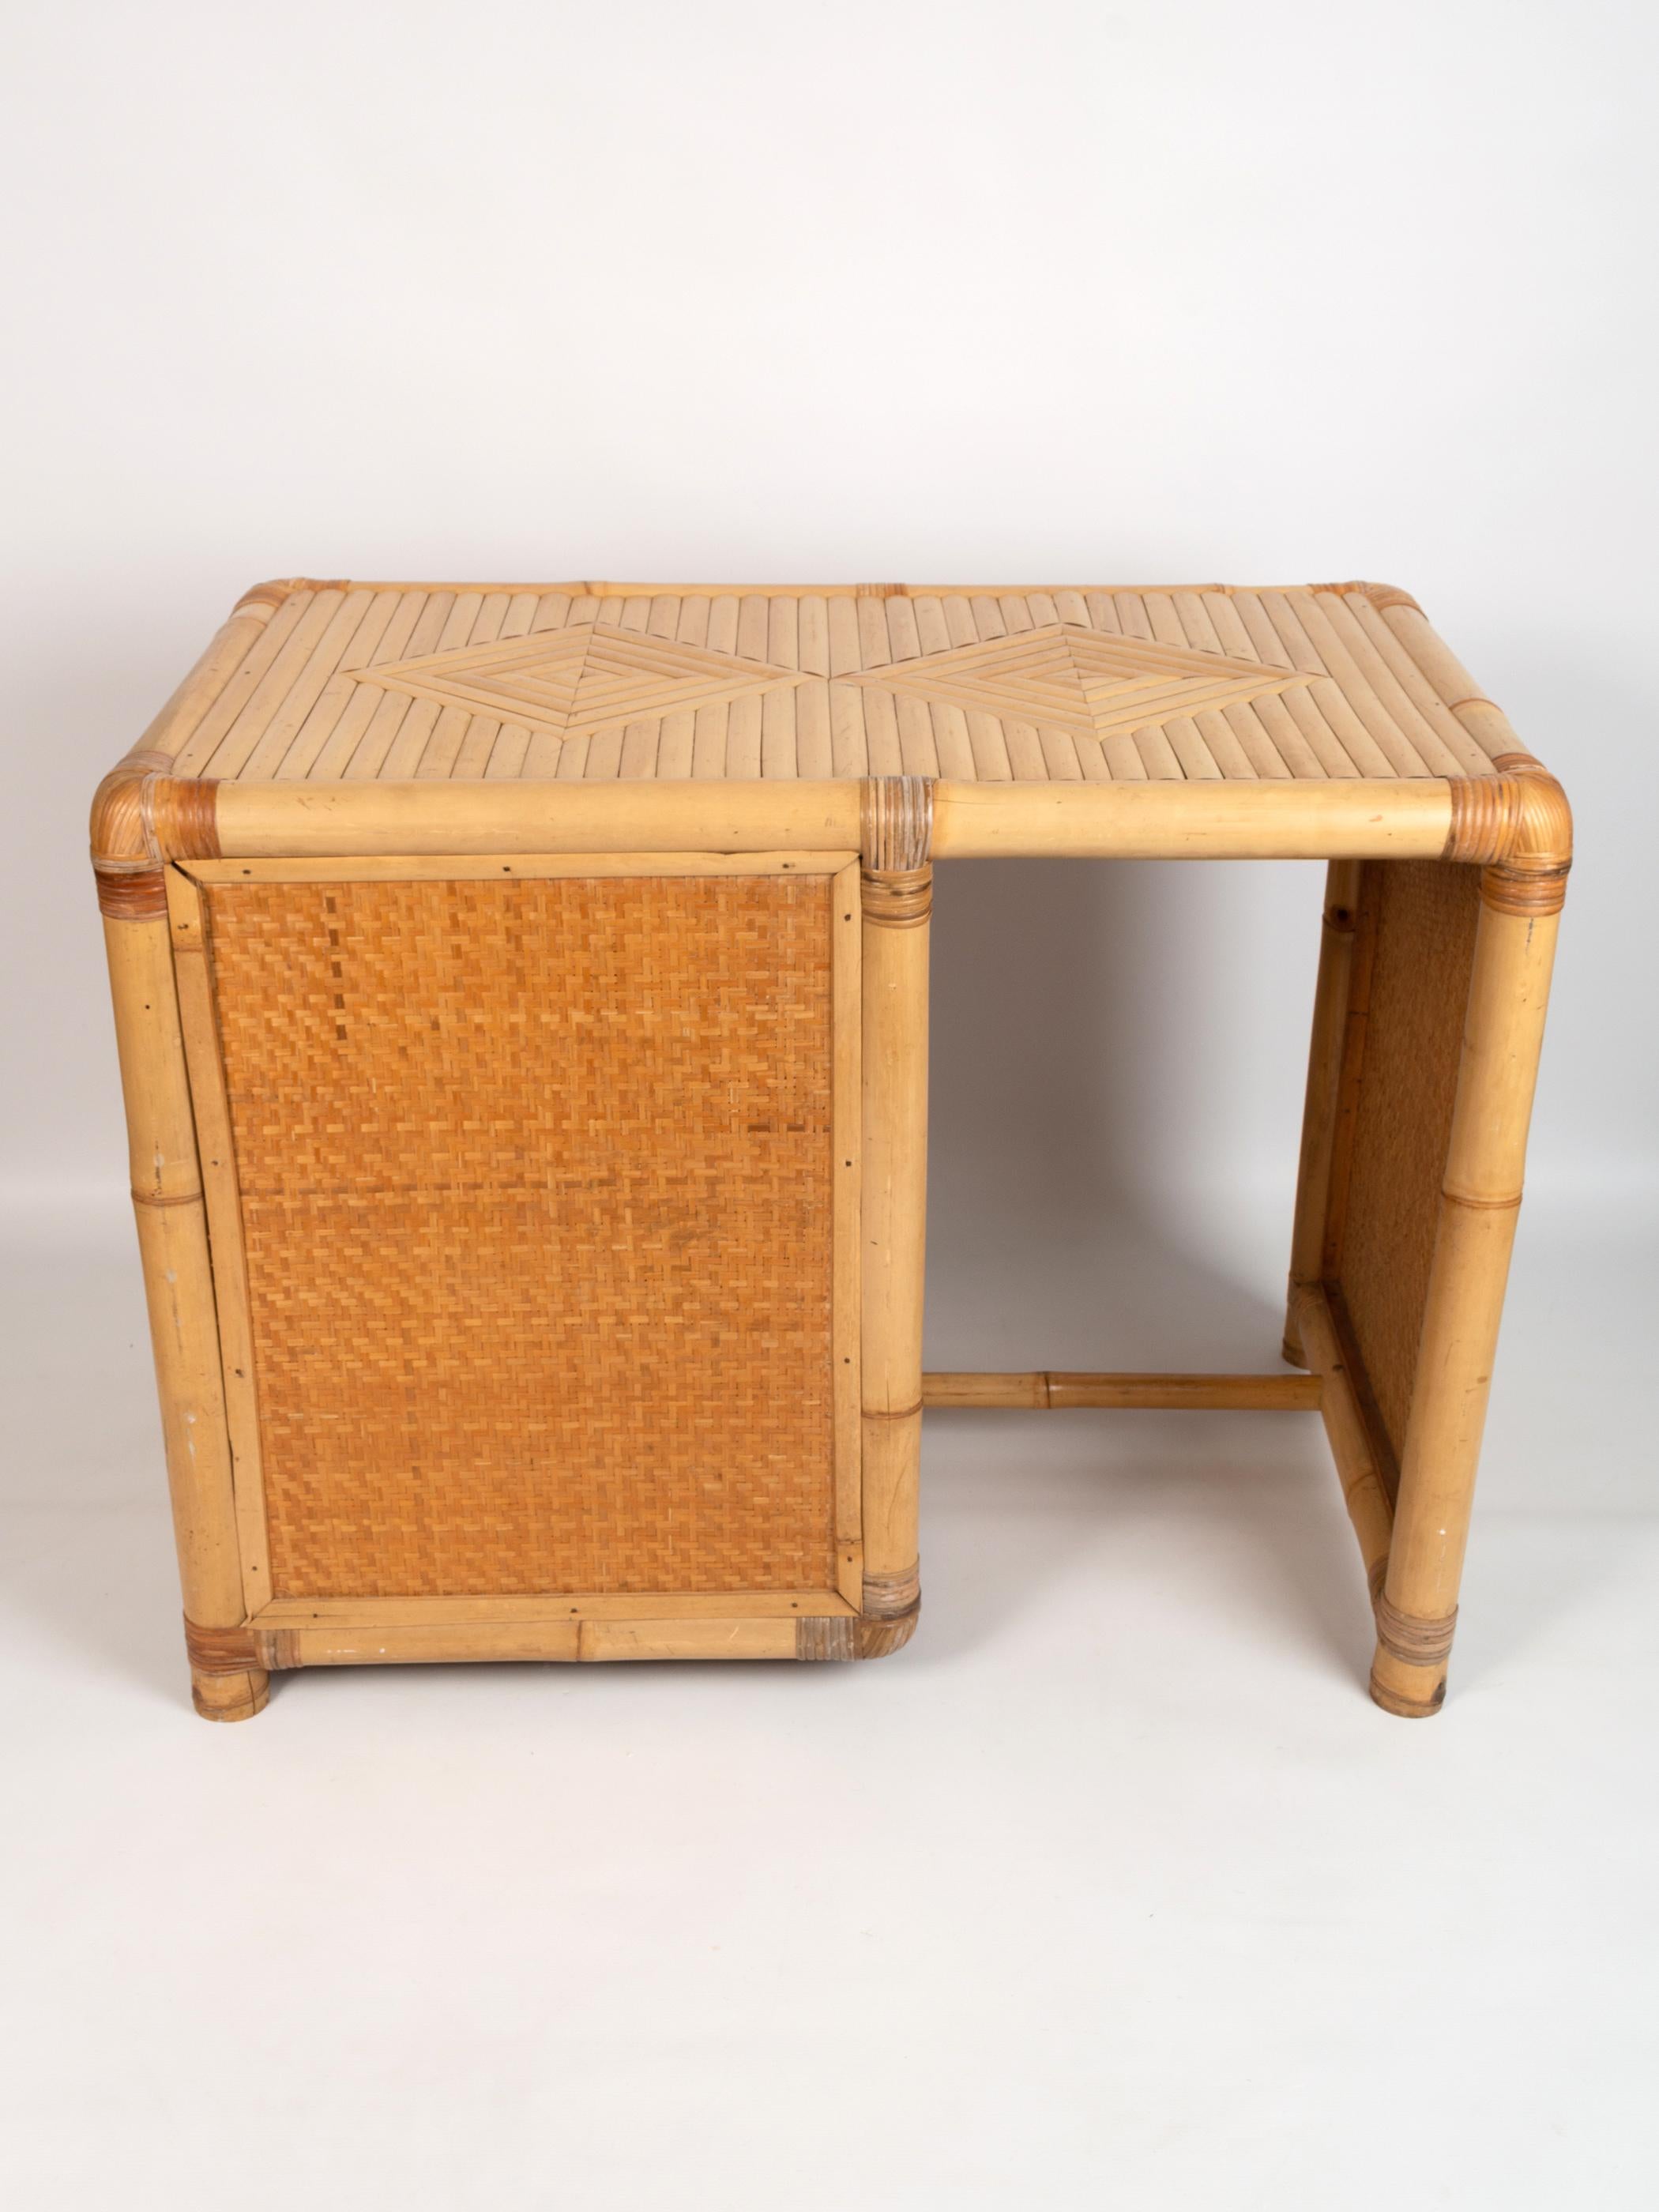 Vivai del Sud Rattan and Bamboo Desk / Vanity Table Italy, C.1970 For Sale 2